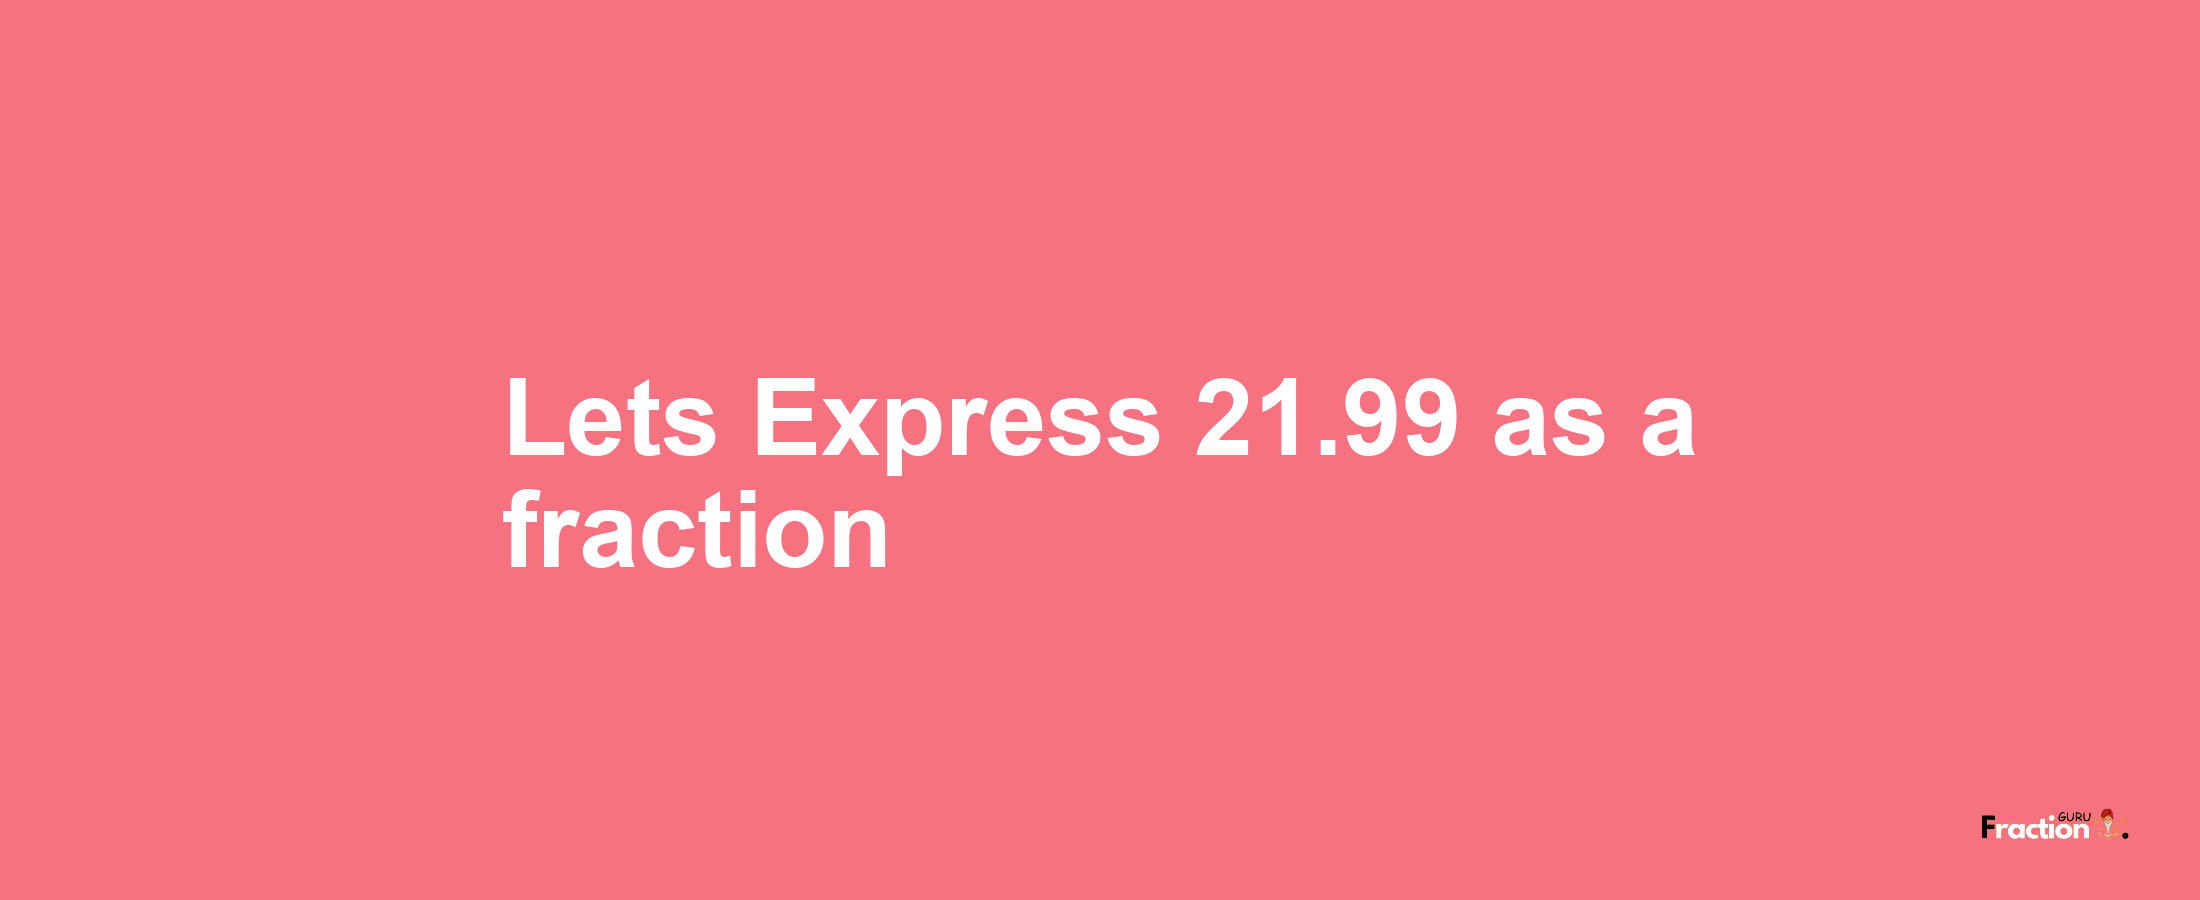 Lets Express 21.99 as afraction